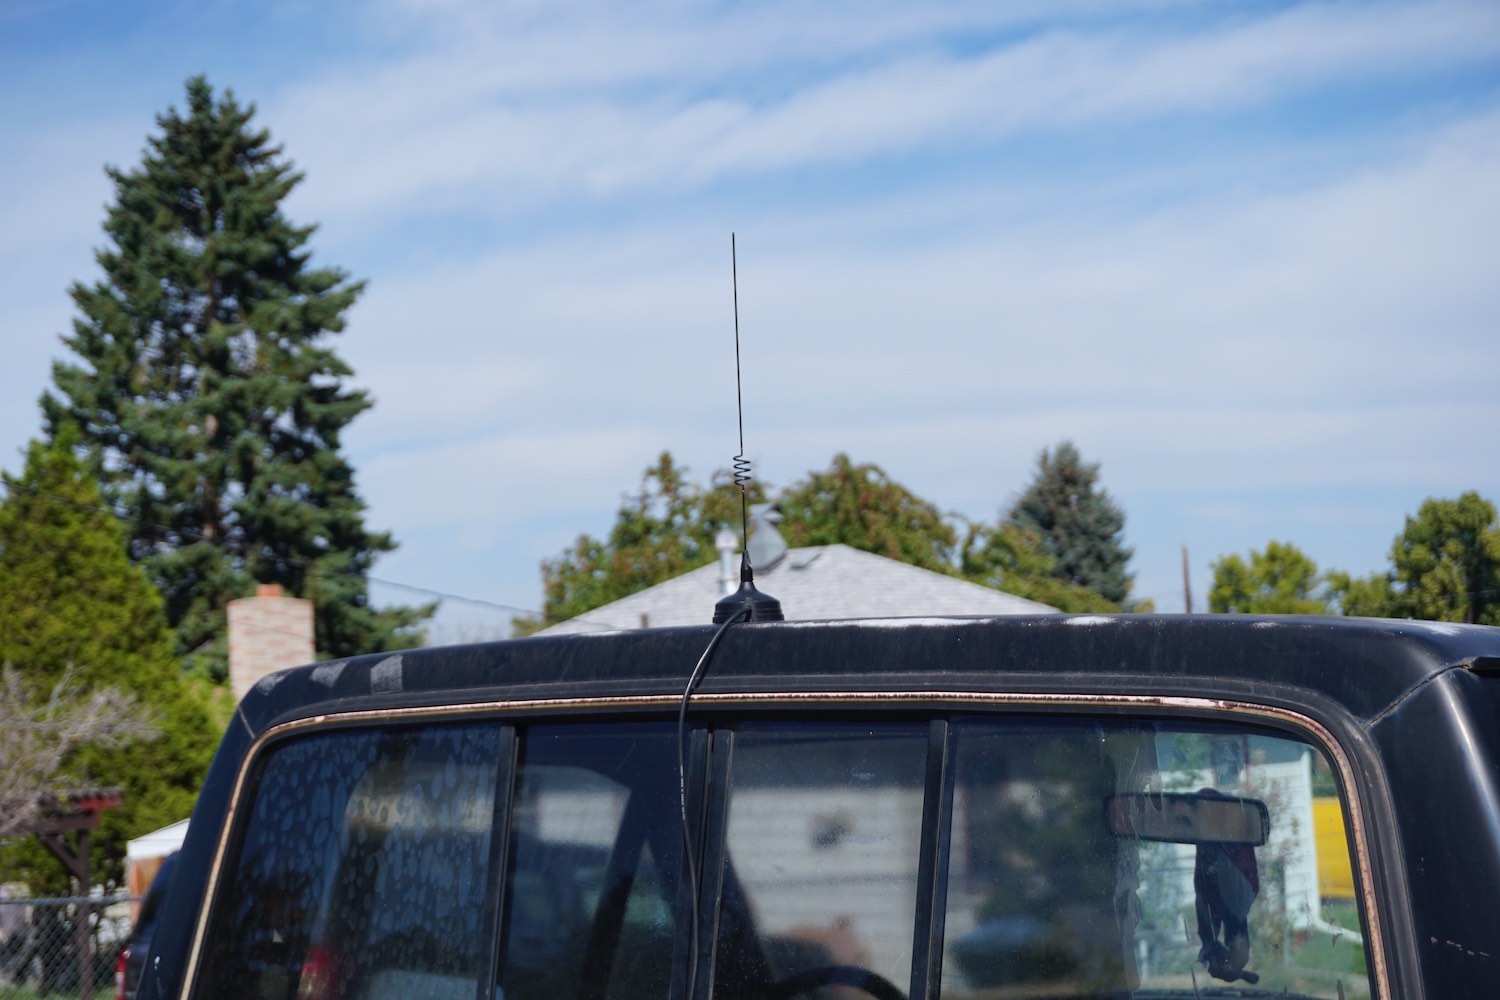 Magnetic CB radio whip antenna on the roof of a black pickup truck, blue sky in the background.